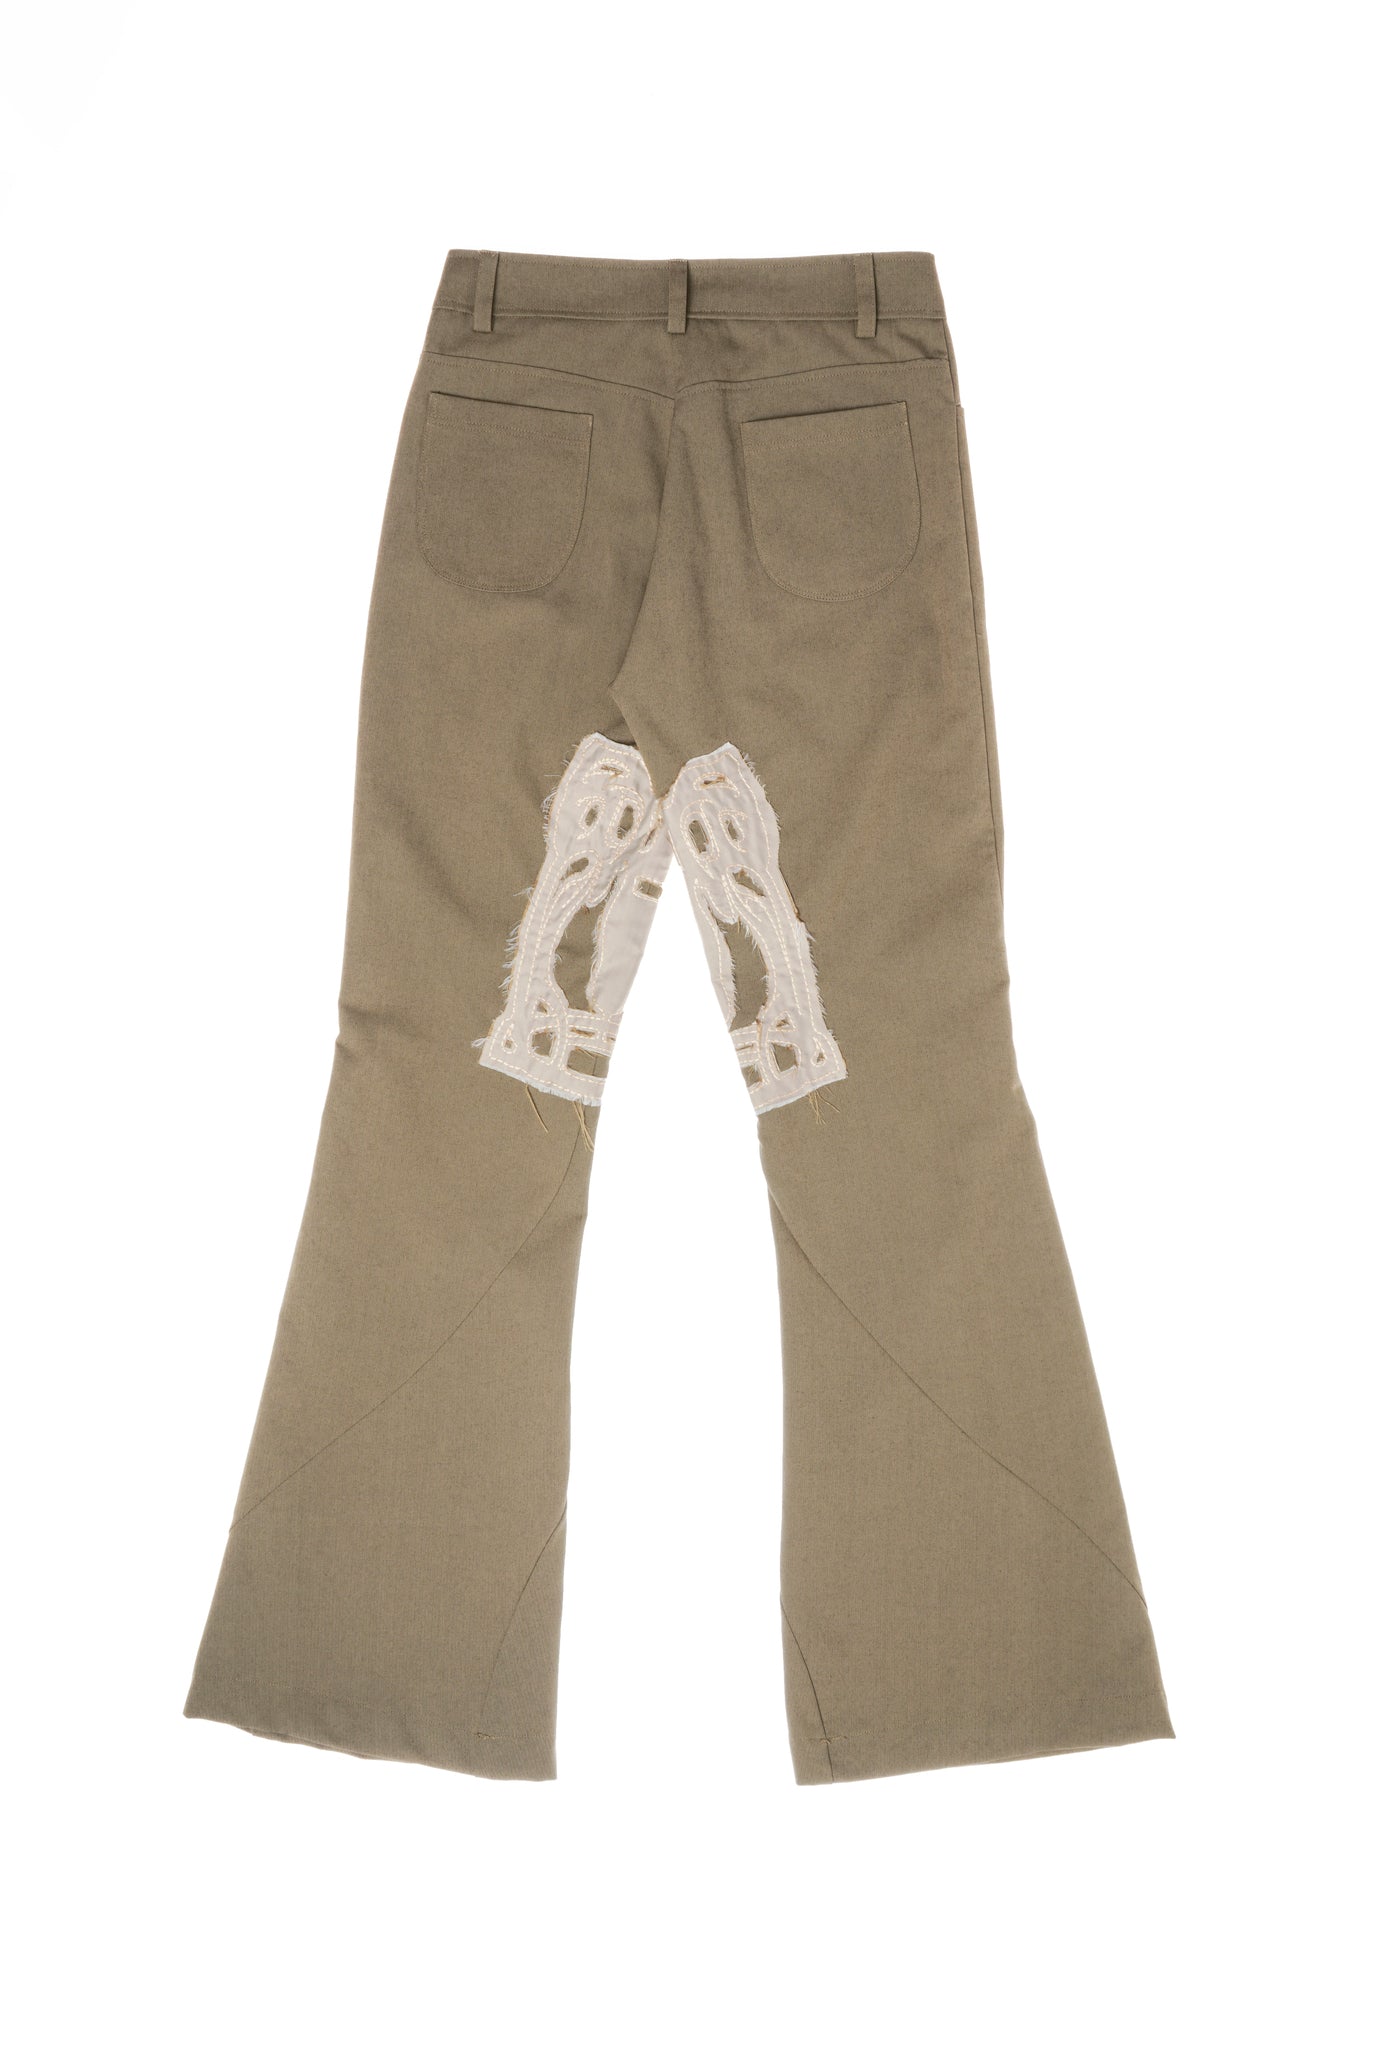 EMBROIDERED TROUSERS (made to order)